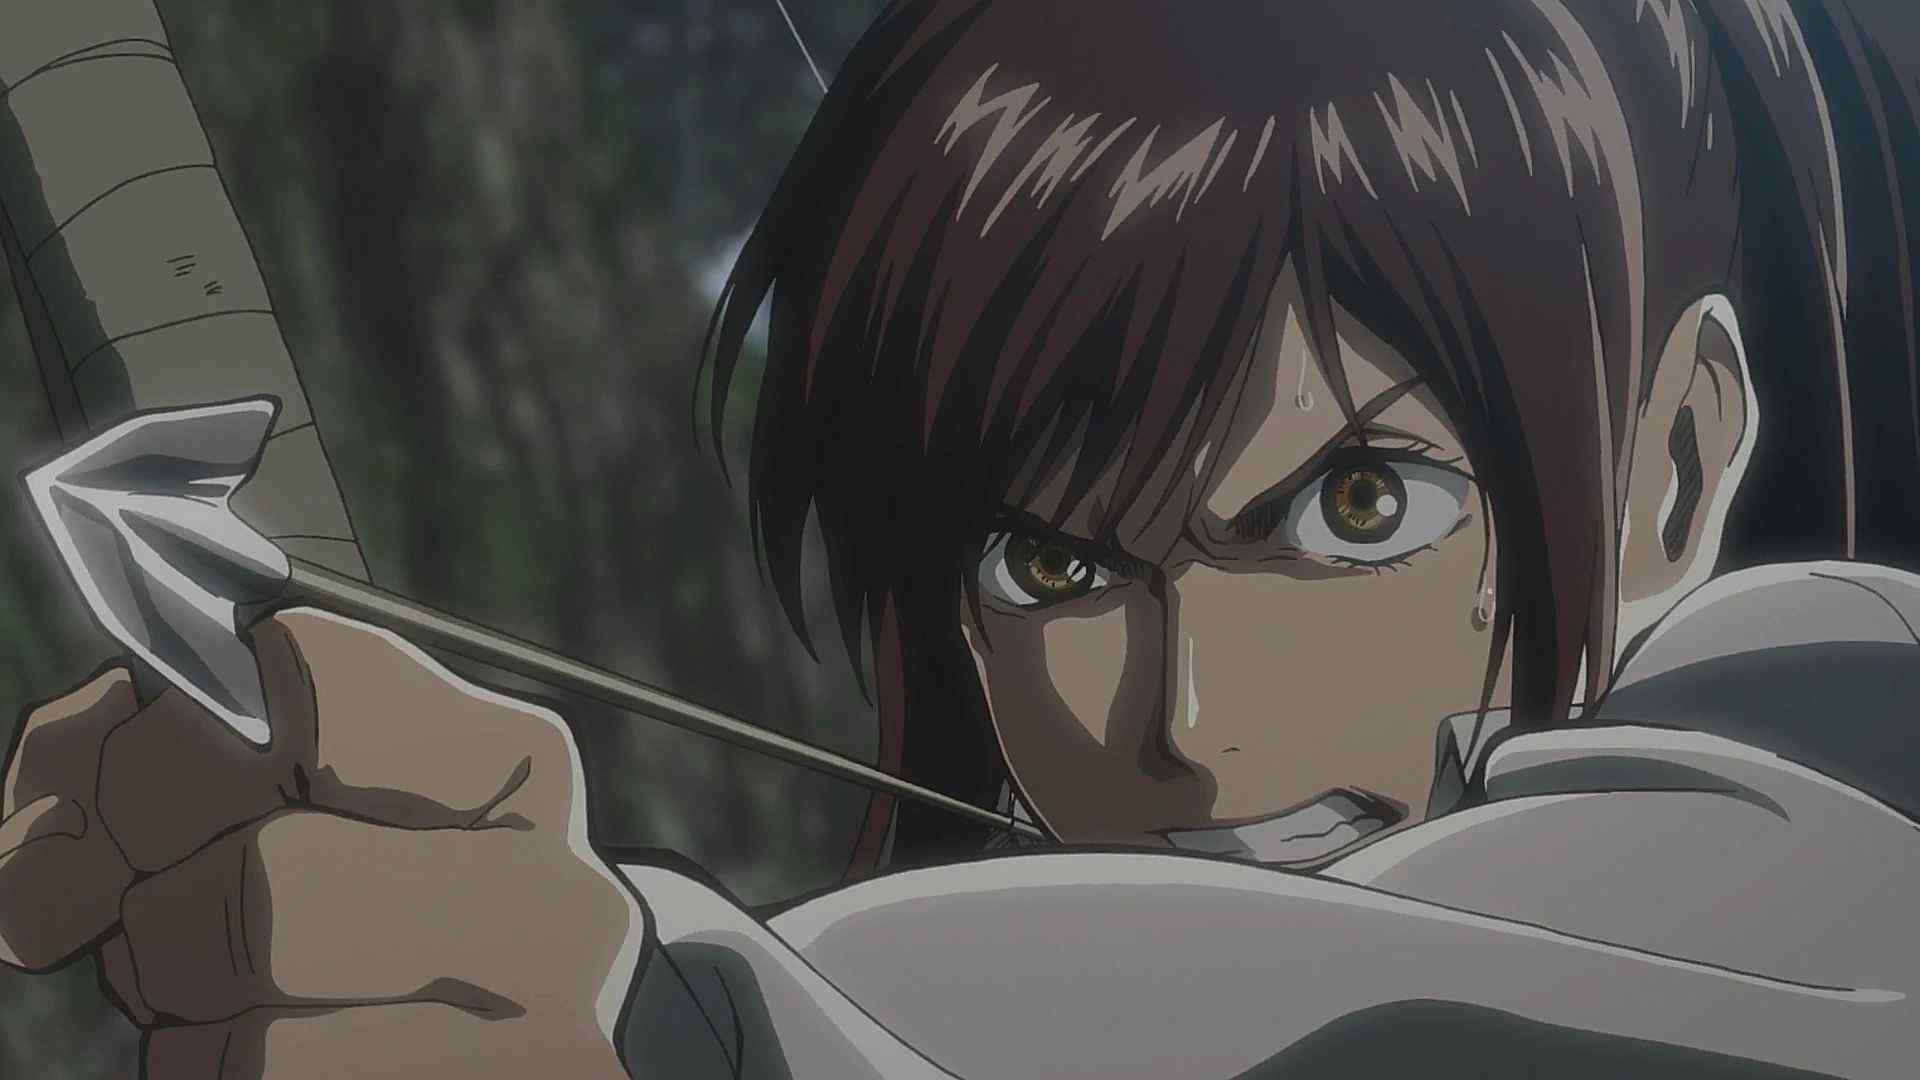 Sasha Blouse was a Survey Corps member and one of the few former members of the 104th Training Corps.